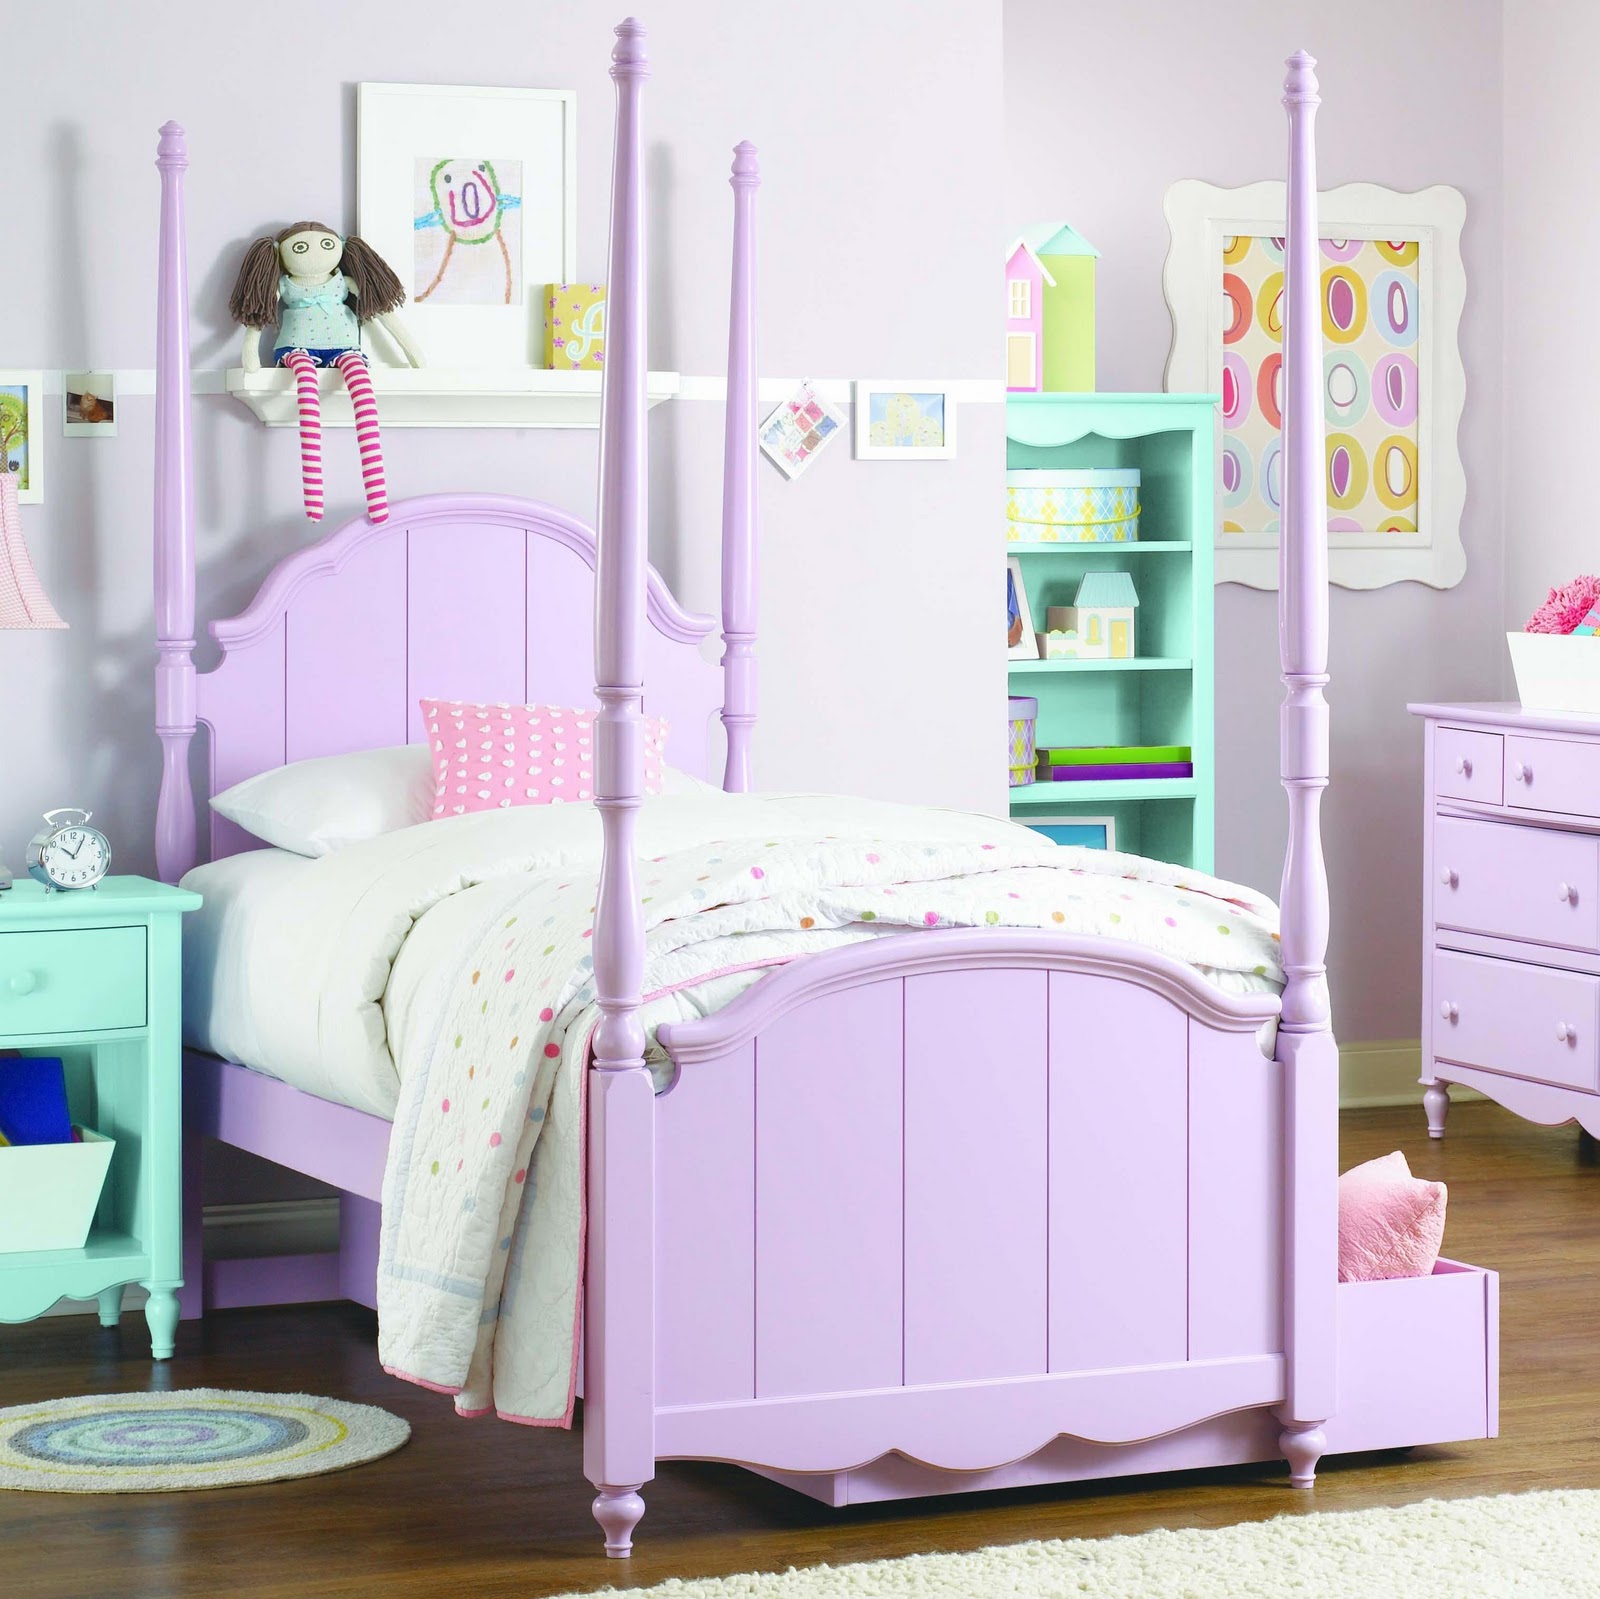 A Vintage Touch: Adorable Kids Furniture by Wayfair (formerly CSN)